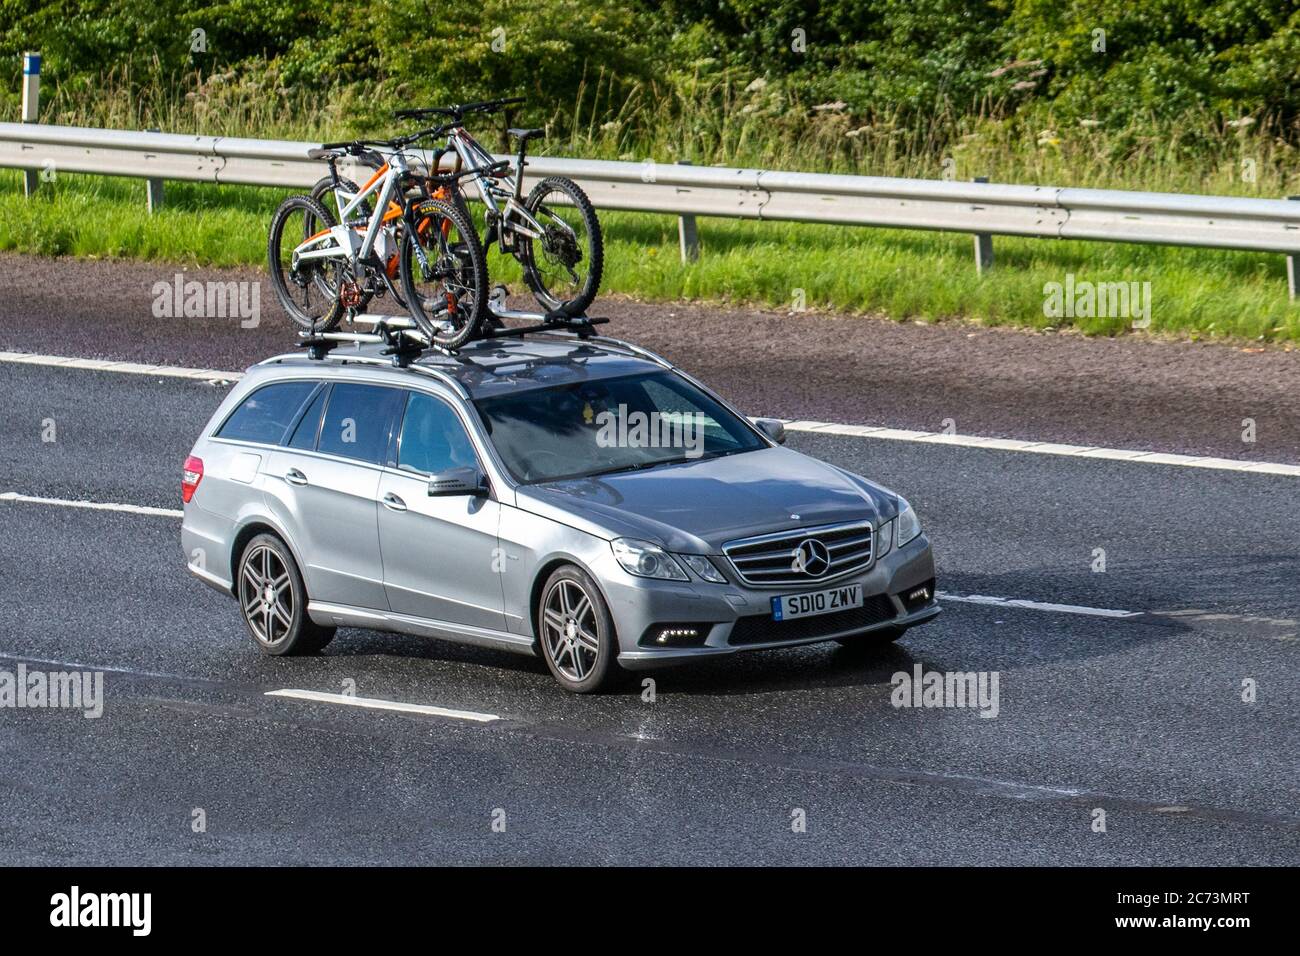 2010 silver Mercedes-Benz E220 Bluef-Cy Sport CDI A with cycle rack & bicycles; Vehicular traffic moving vehicles, cars driving vehicle on UK roads, motors, motoring on the M6 motorway highway network. Stock Photo